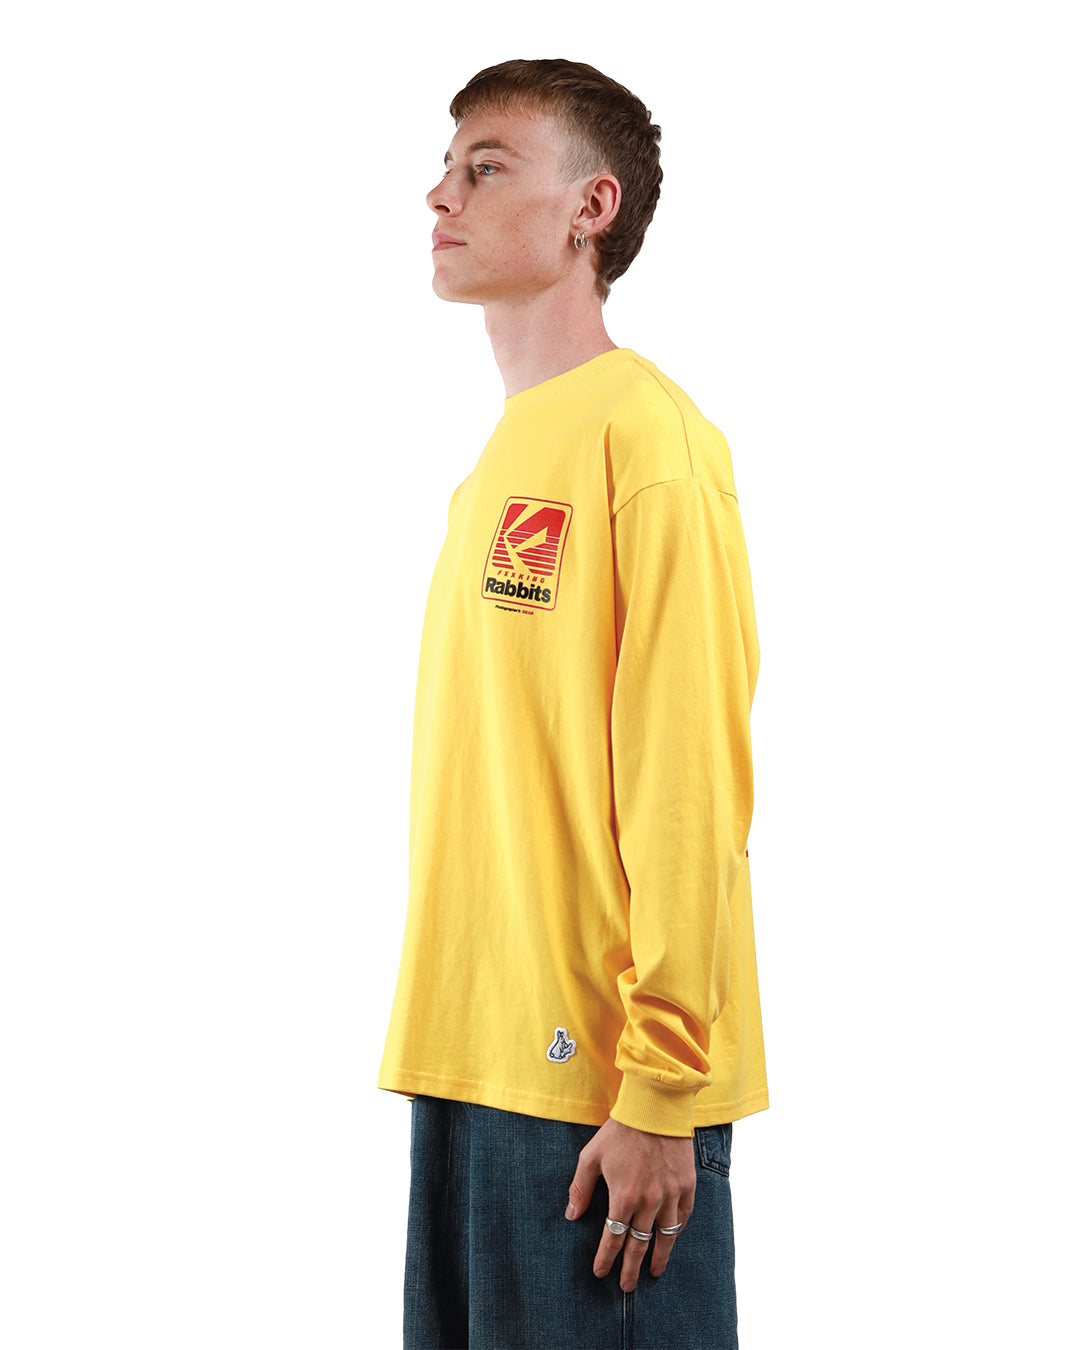 Fxxking Rabbits Photographers Gear L/S Tee Yellow